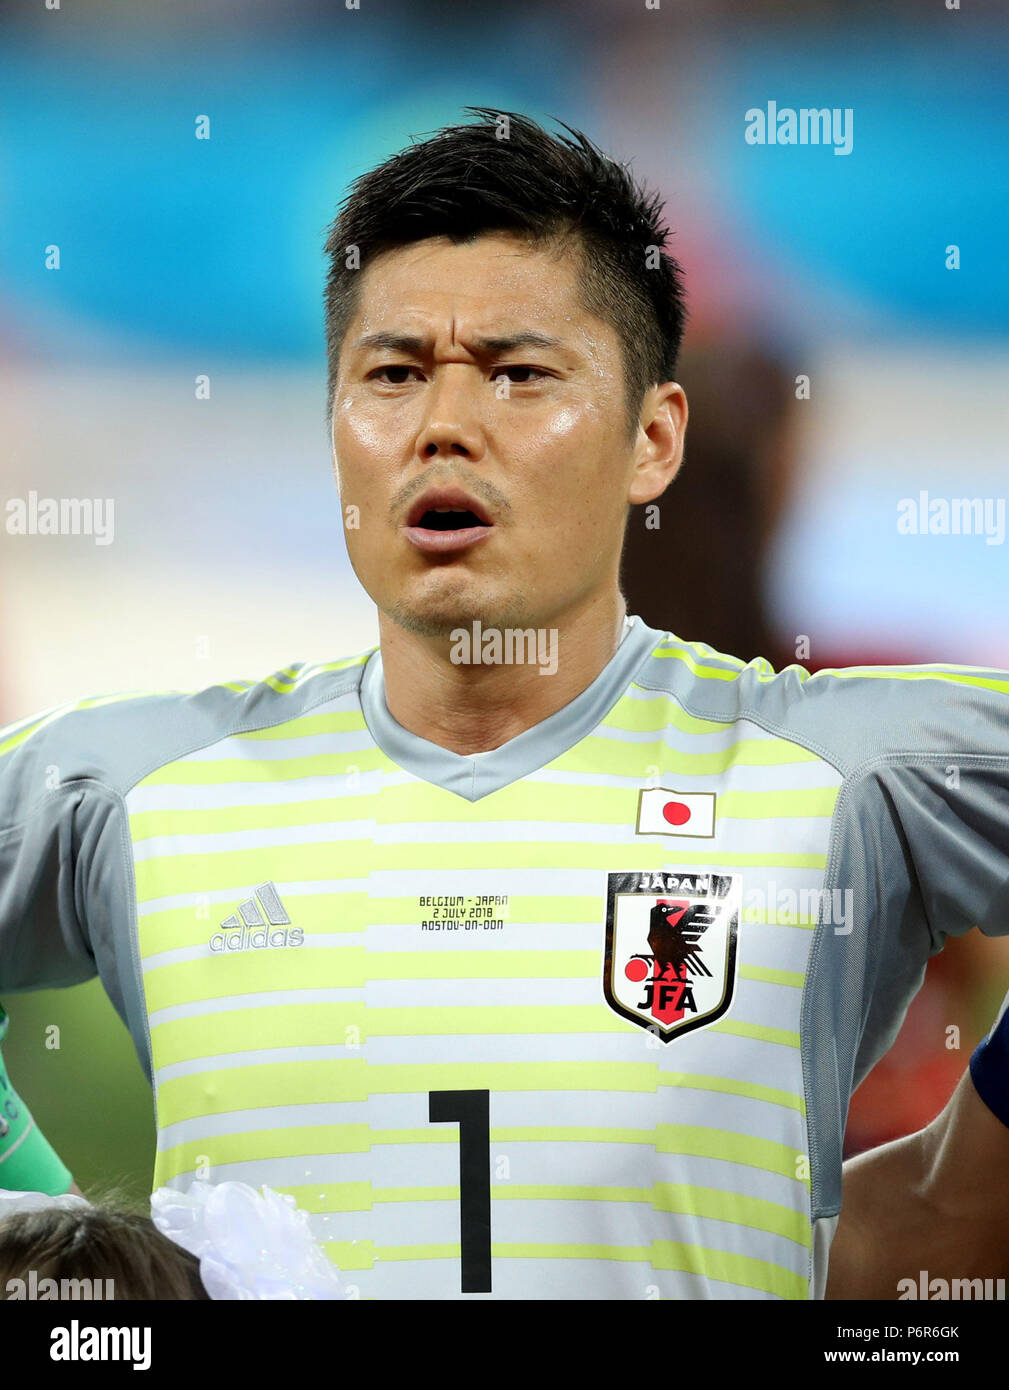 Rostov On Don. 2nd July, 2018. Eiji Kawashima of Japan is seen prior to the 2018 FIFA World Cup round of 16 match between Belgium and Japan in Rostov-on-Don, Russia, July 2, 2018. Credit: Fei Maohua/Xinhua/Alamy Live News Stock Photo